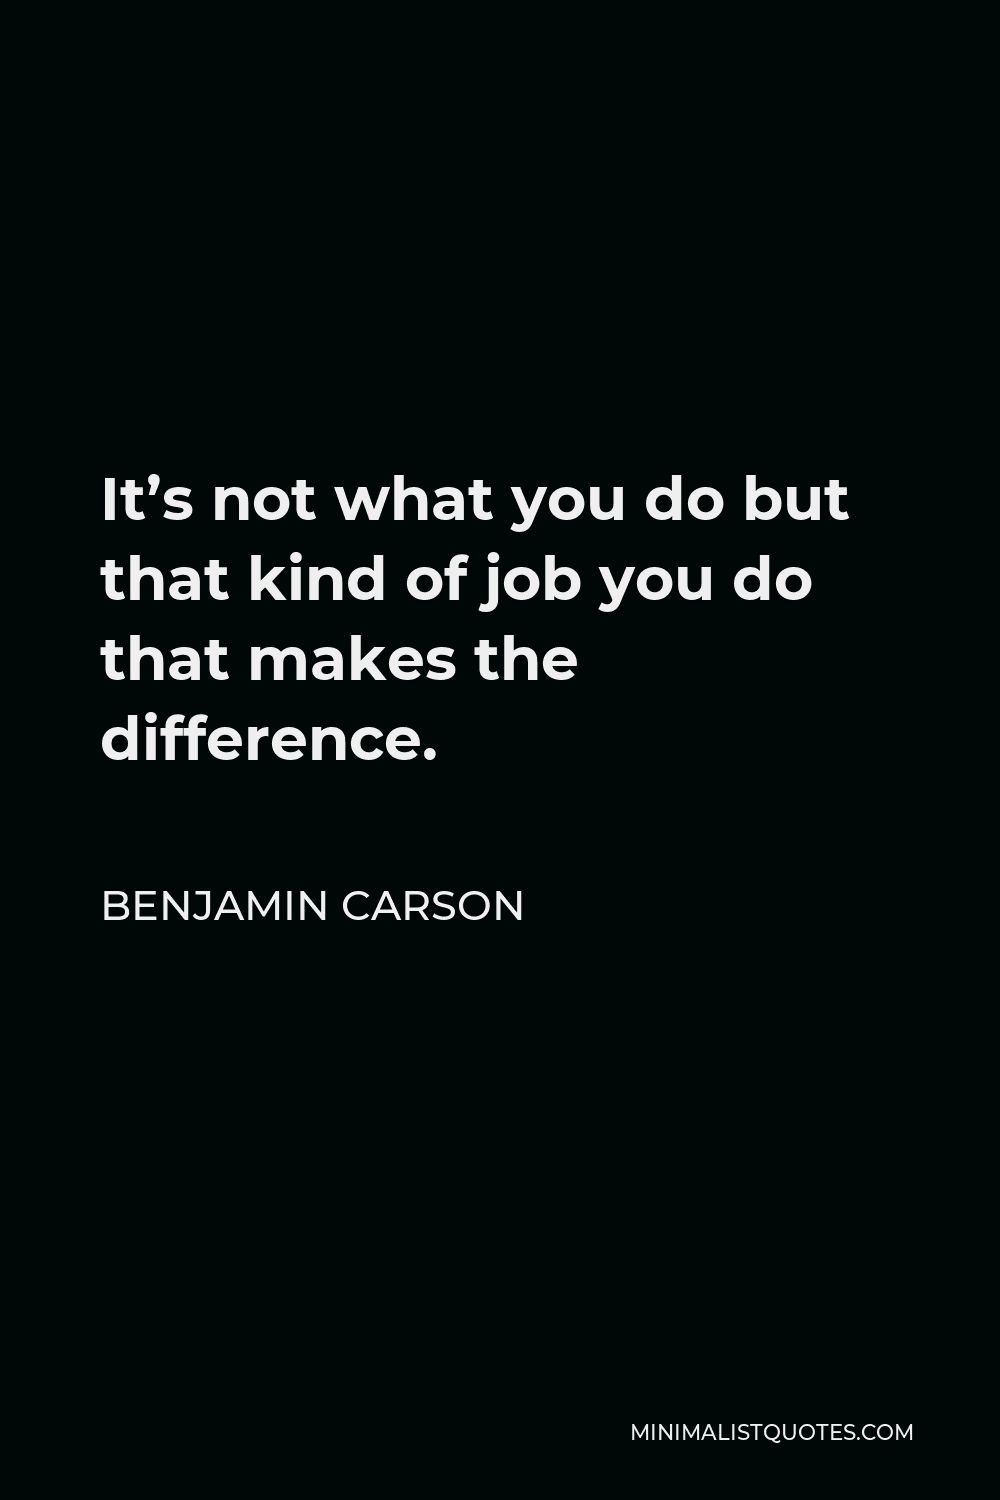 Benjamin Carson Quote - It’s not what you do but that kind of job you do that makes the difference.